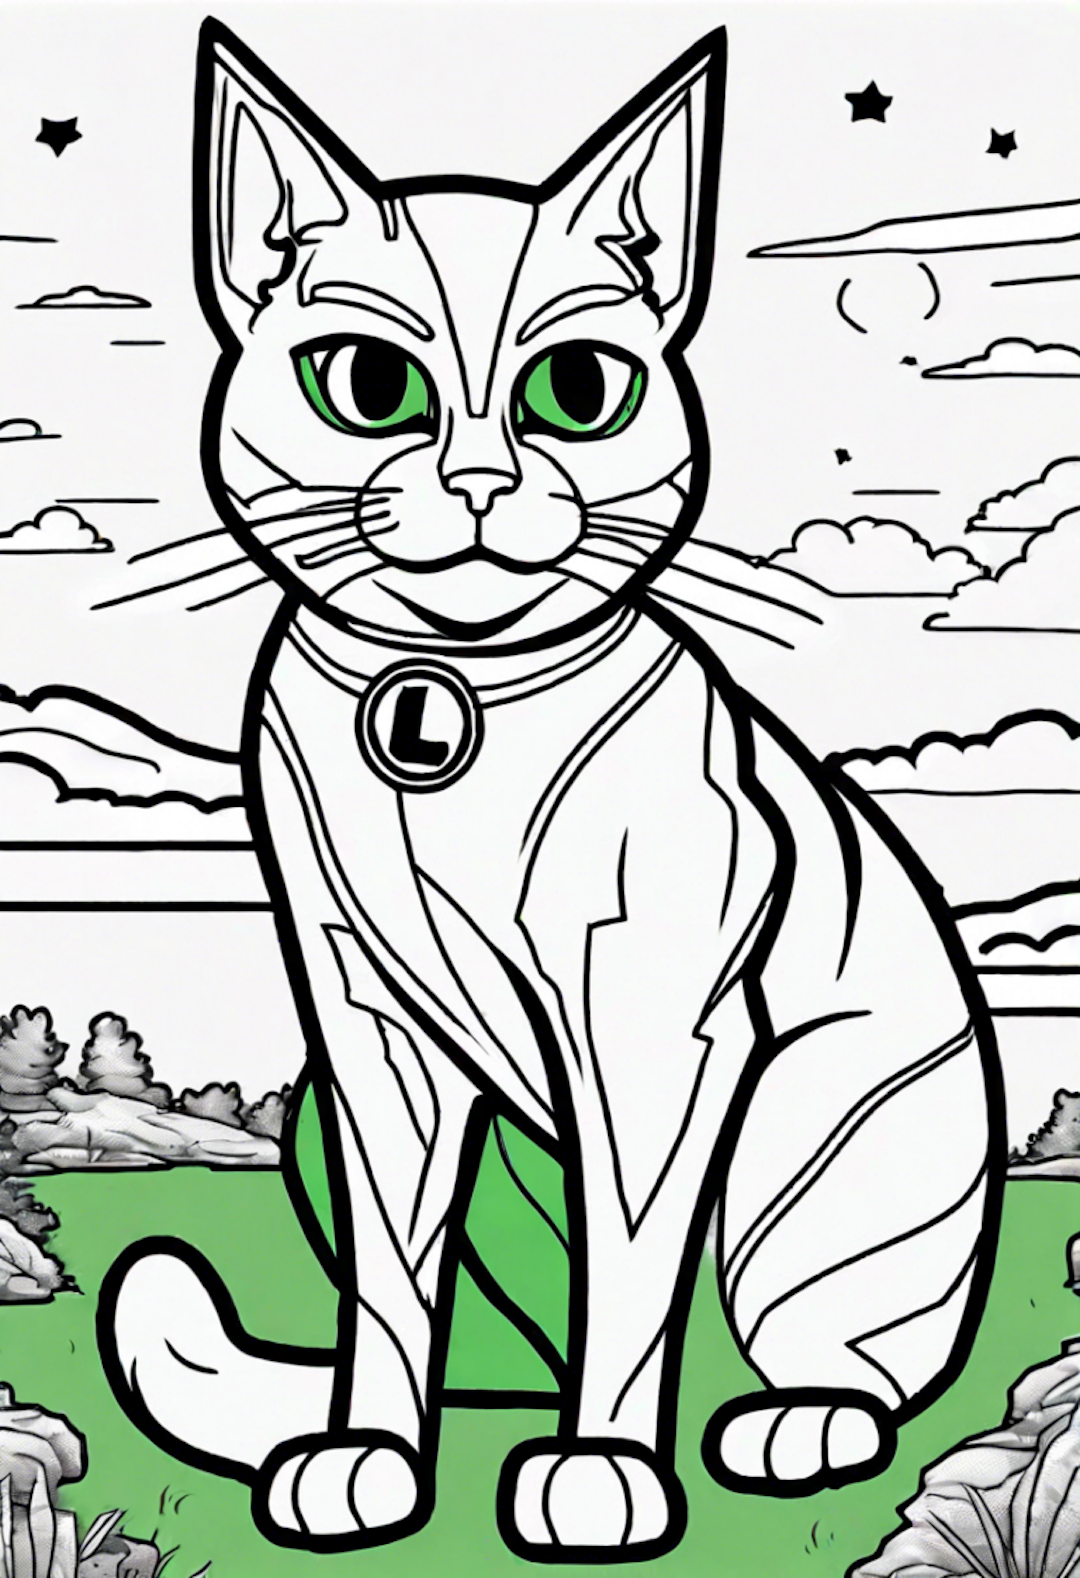 Luna the Cat in a Scenic Landscape coloring pages